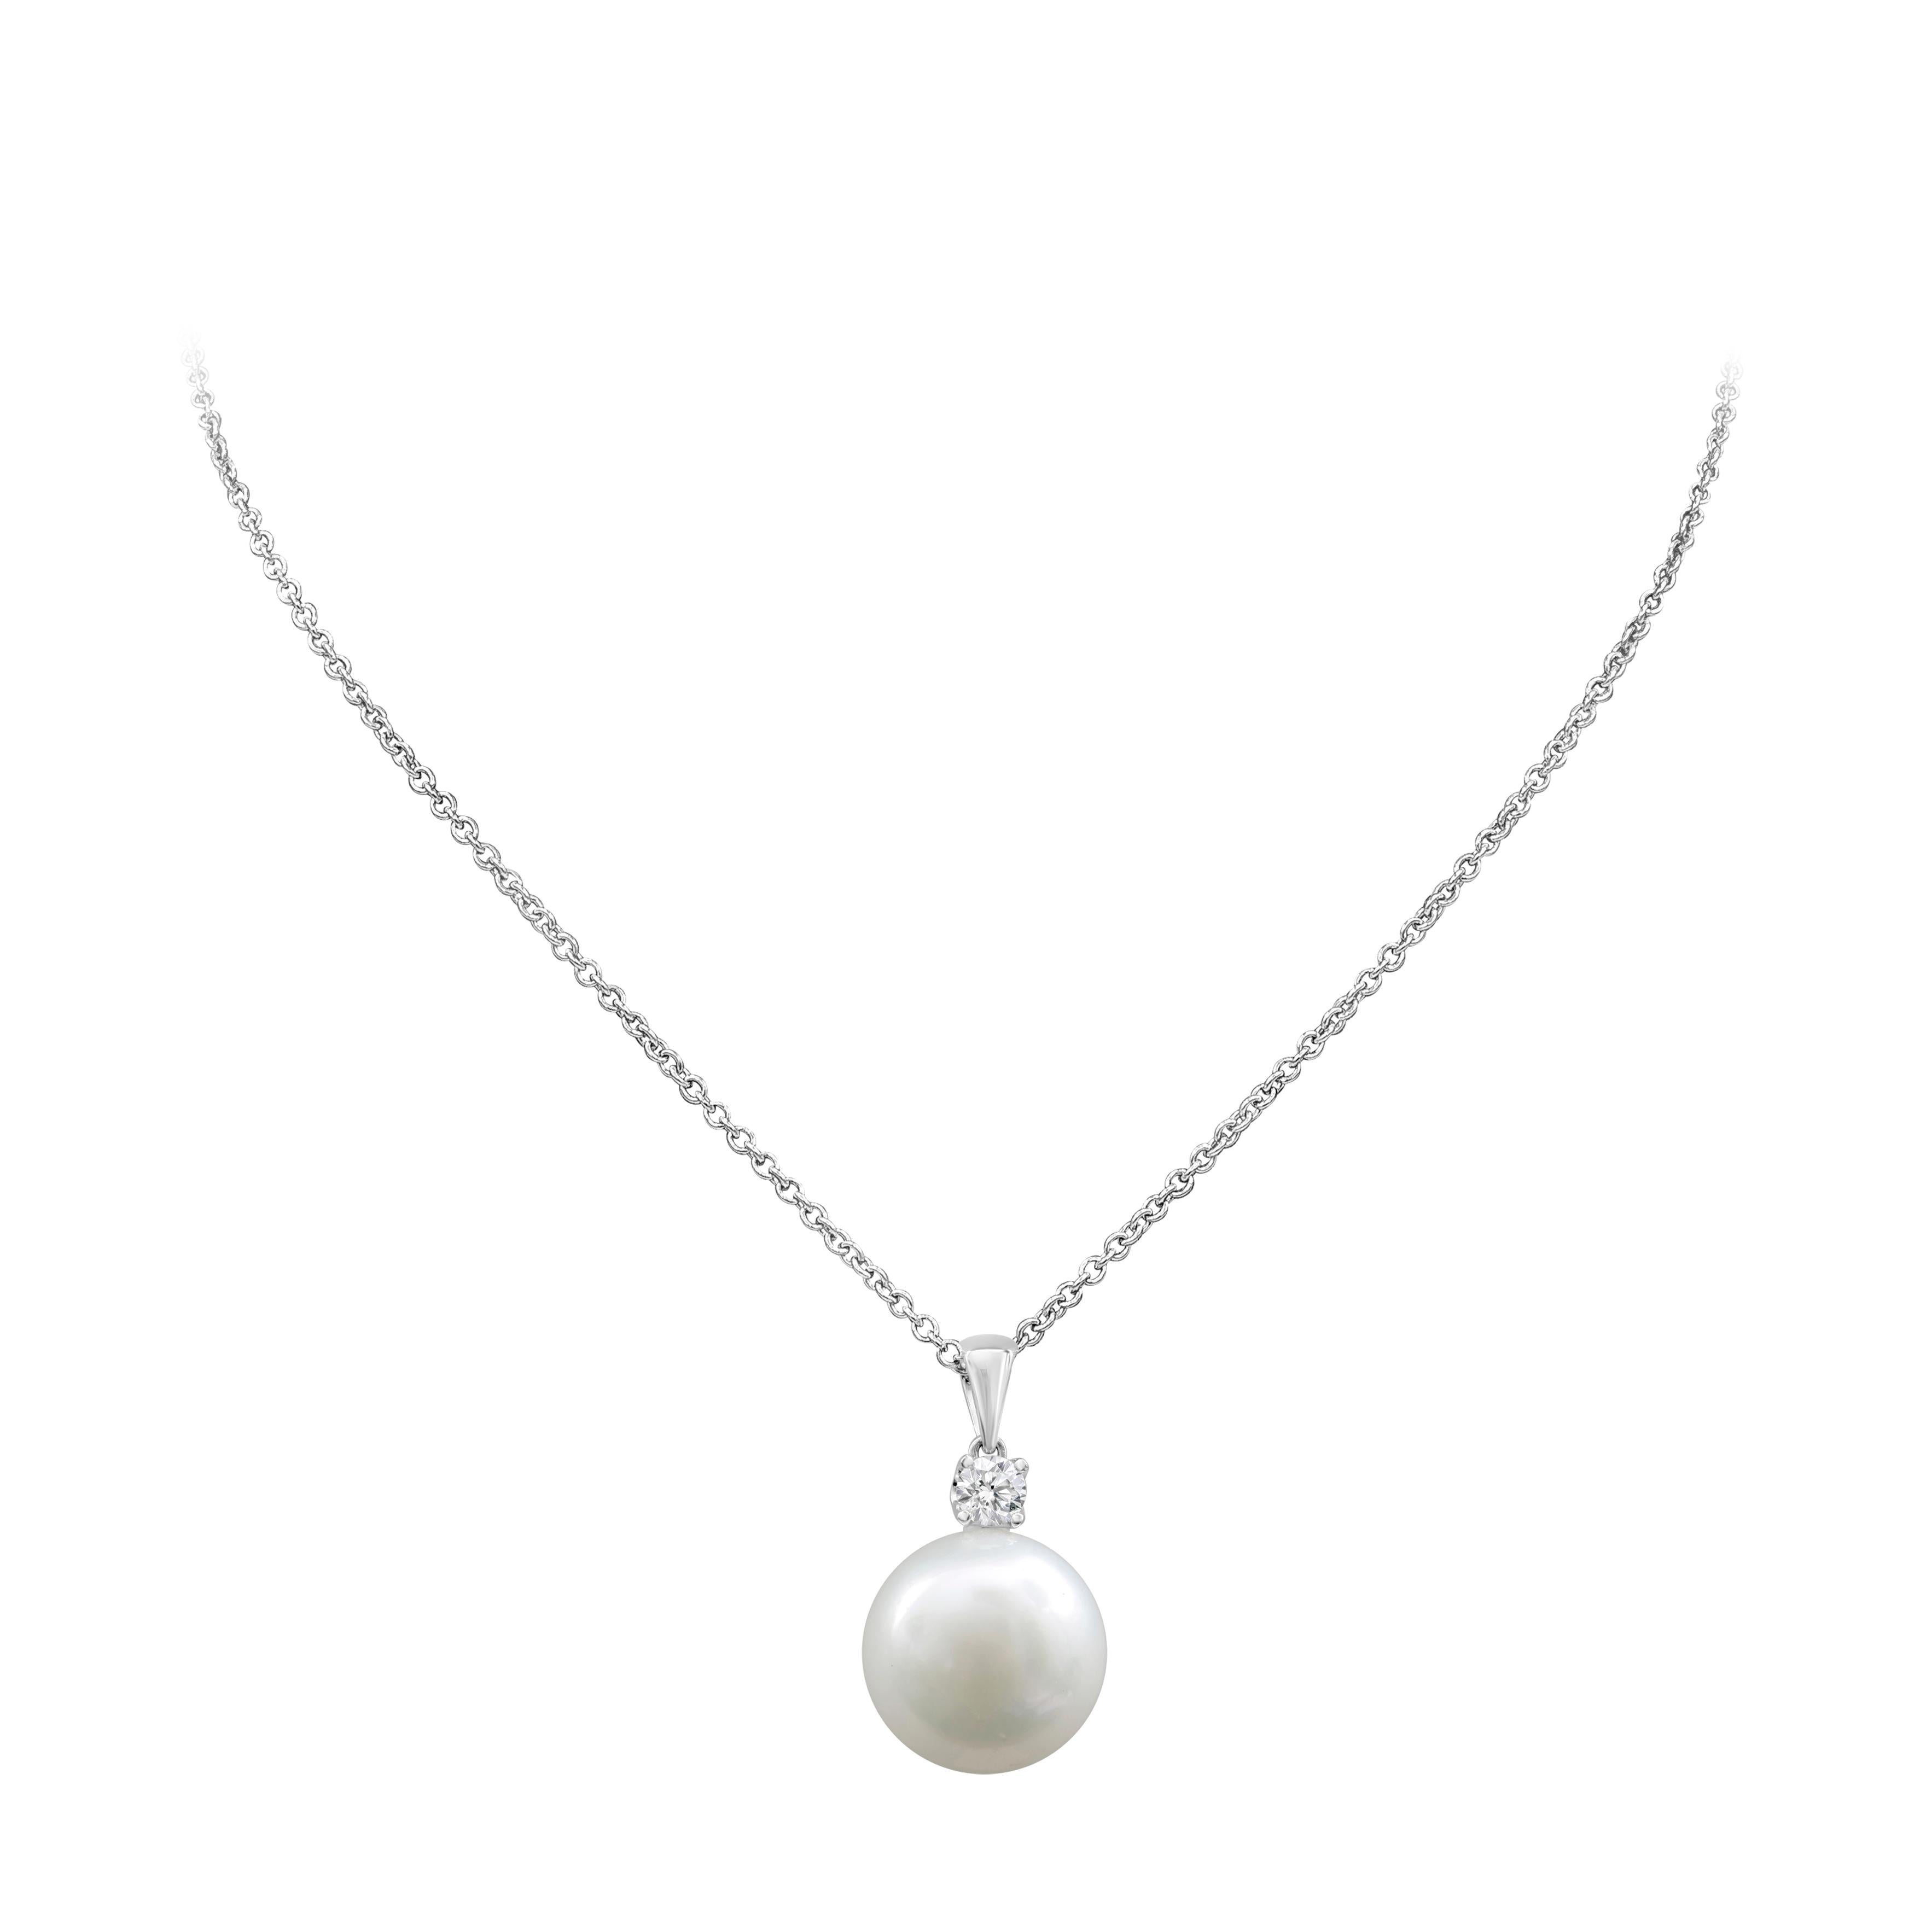 A stylish and attractive pendant necklace showcasing 14mm fine white pearl,  accented with brilliant round shape diamond weighing 0.26 carats, set in a classic four prong setting. Perfectly made in 18k white gold and suspended on an 18 inch